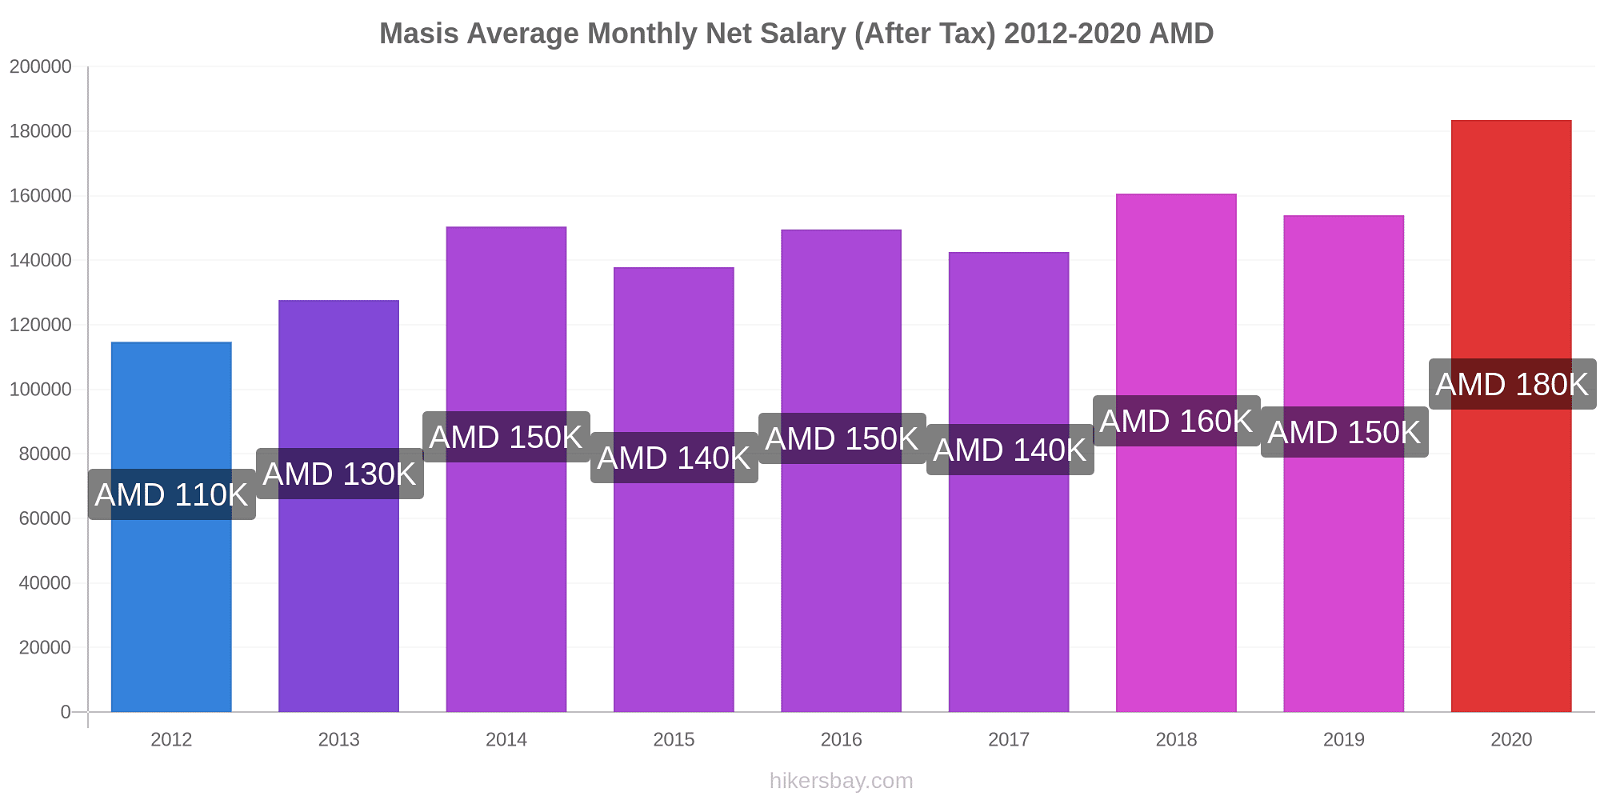 Masis price changes Average Monthly Net Salary (After Tax) hikersbay.com